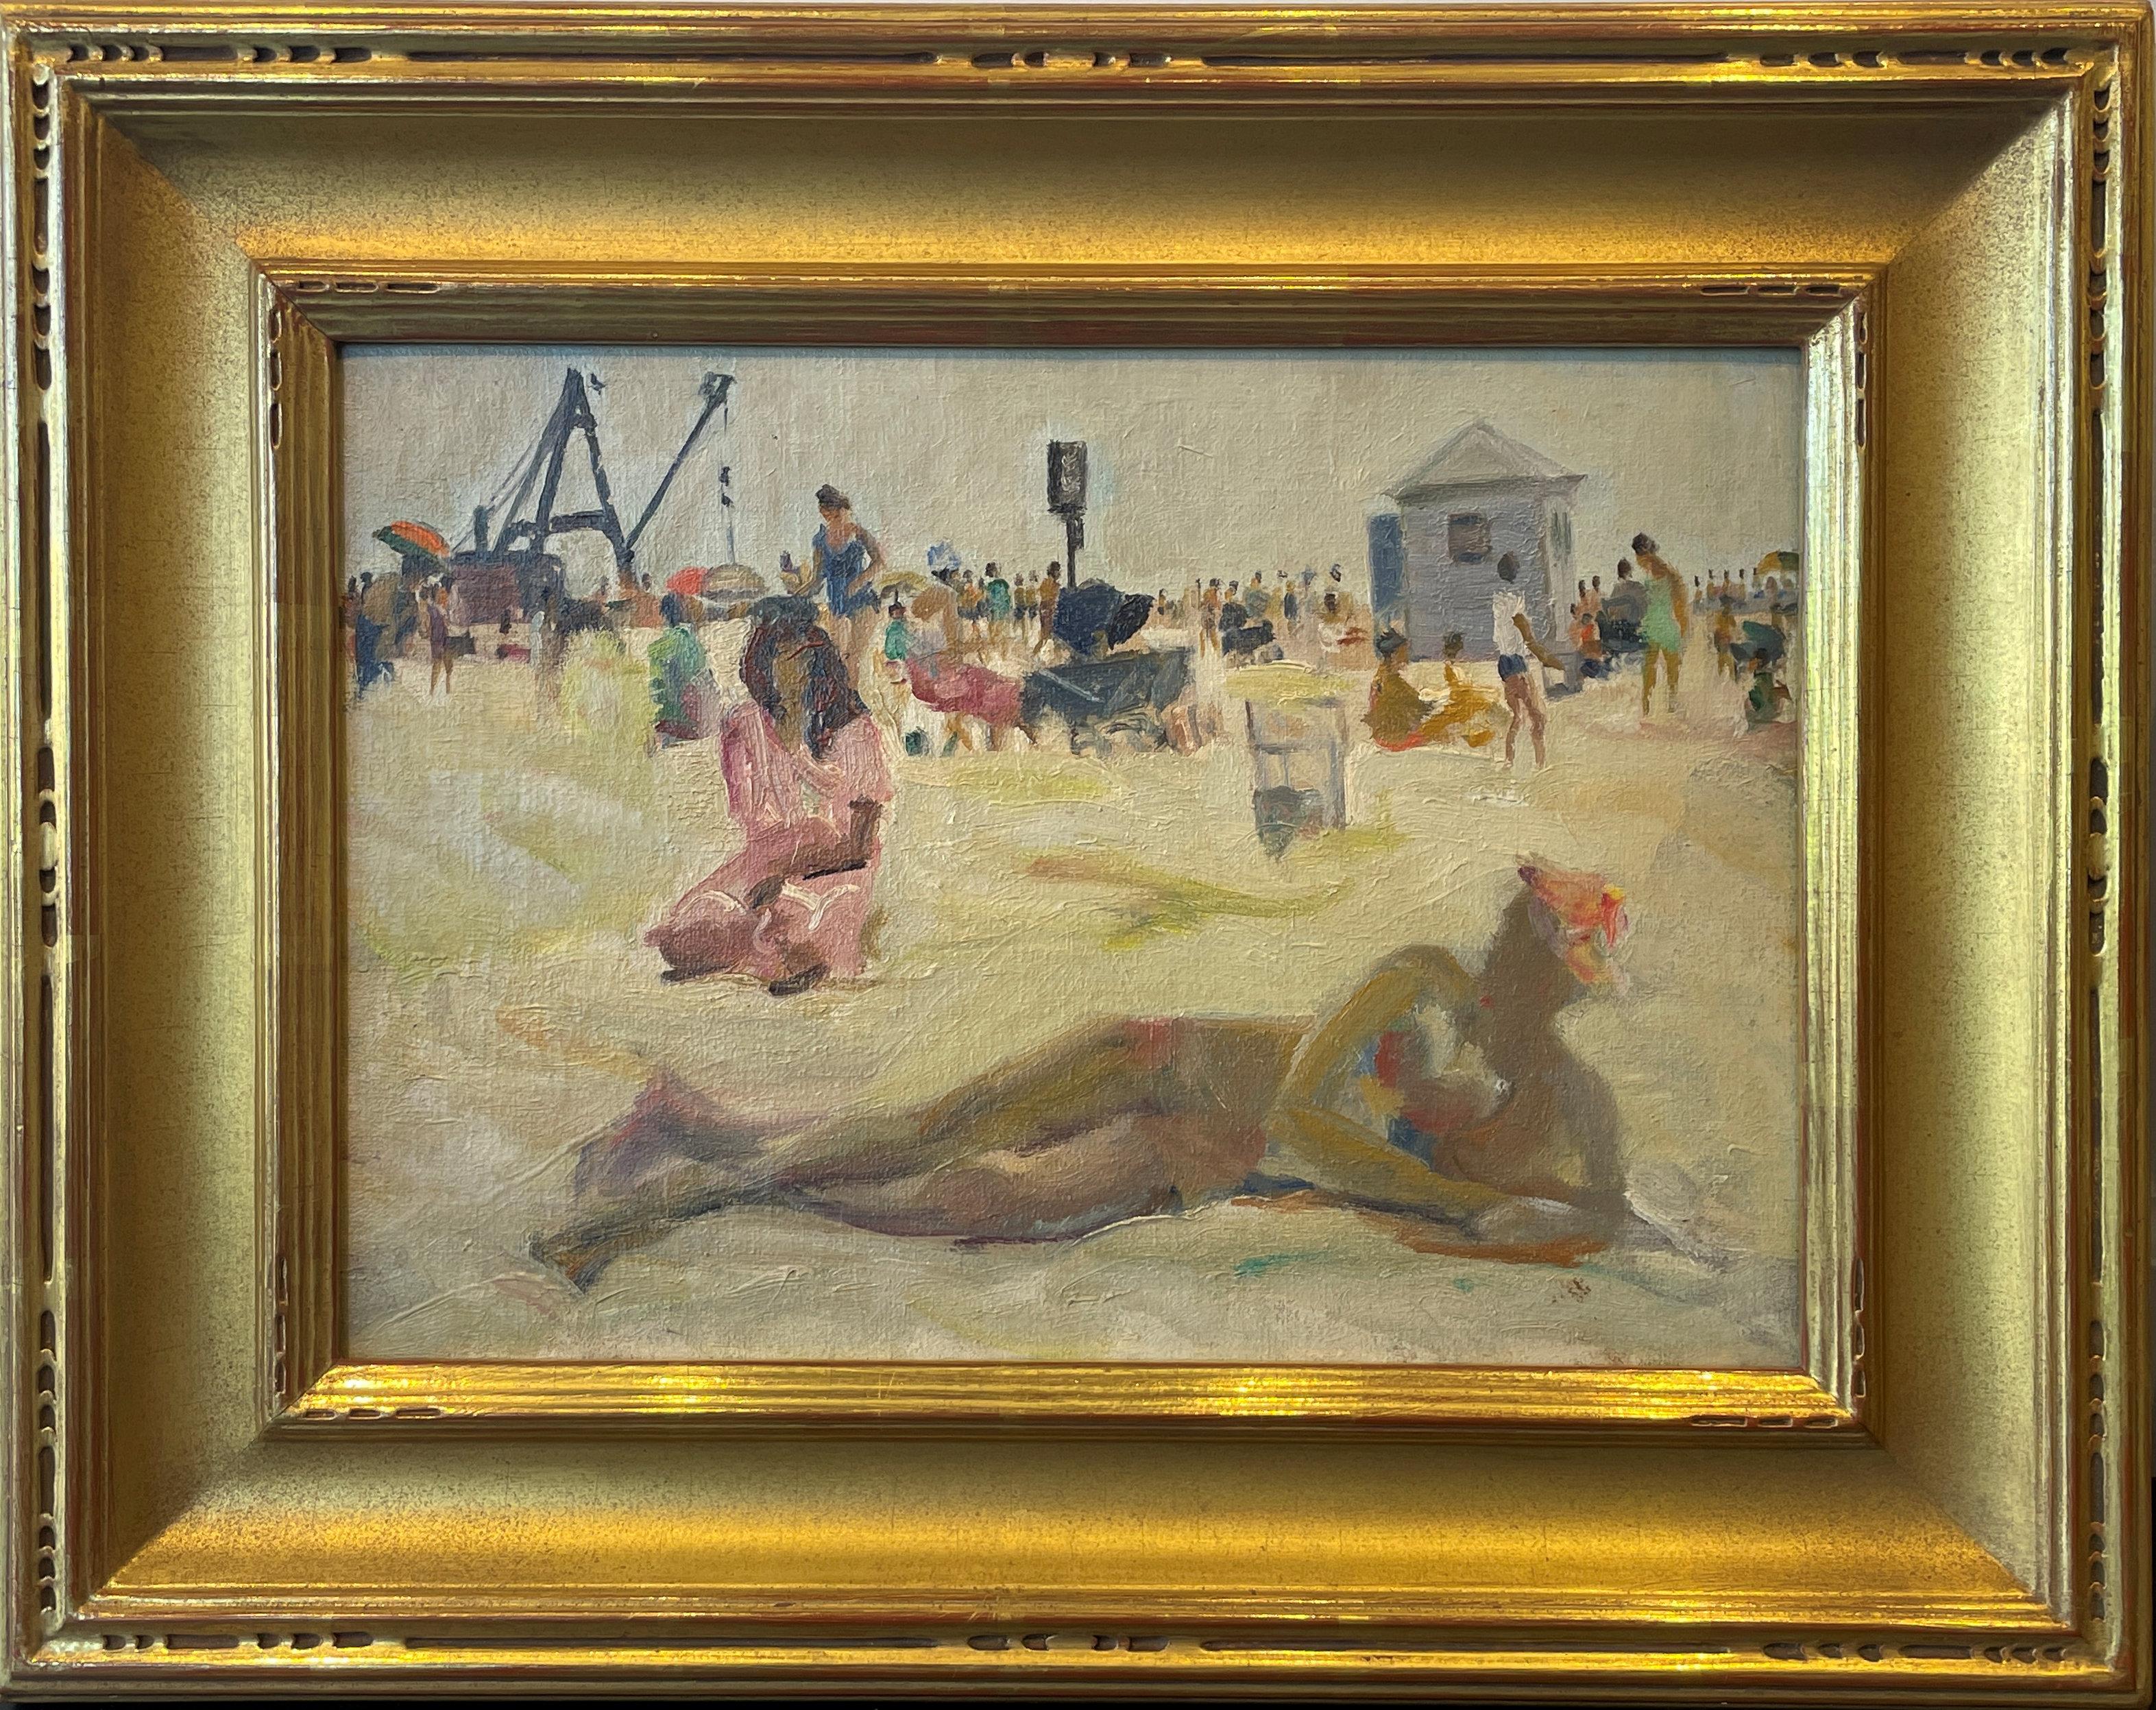 Nathan Hoffman
Brighton Beach, August 5, 1941
Signed, titled, dated and estate stamped on the reverse
Oil on board
9 3/4 x 14 inches

Born in Russia, the son of Friede (1878 – 1956) and Benjamin Hoffman (1878 – a. 1942). Benjamin was a dealer in